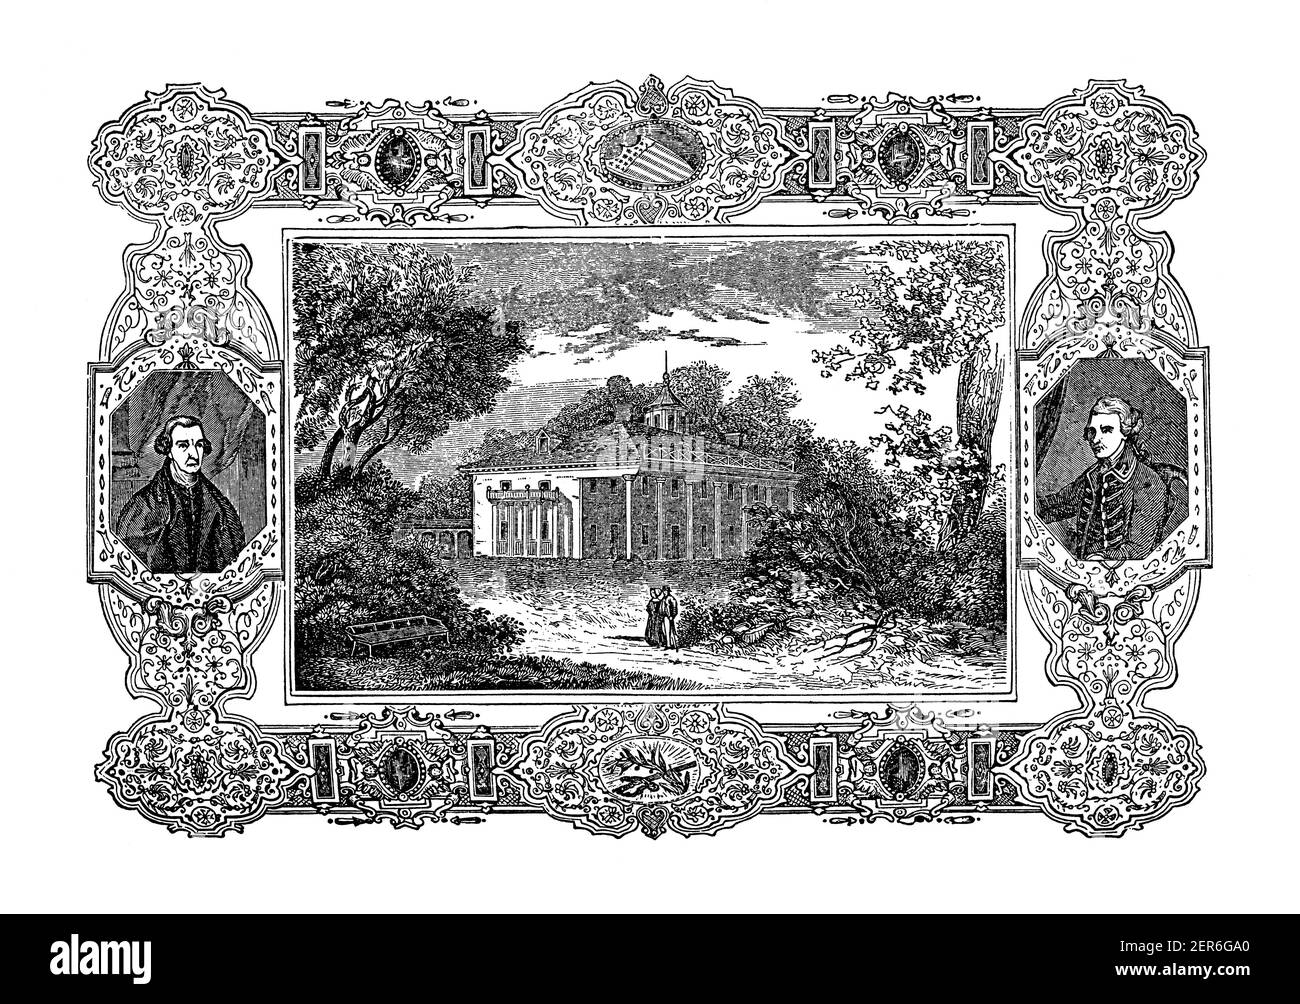 Antique engraving with decorative vignette of Mount Vernon in Virginia, which was the home of George Washington, the first President of the United Sta Stock Photo